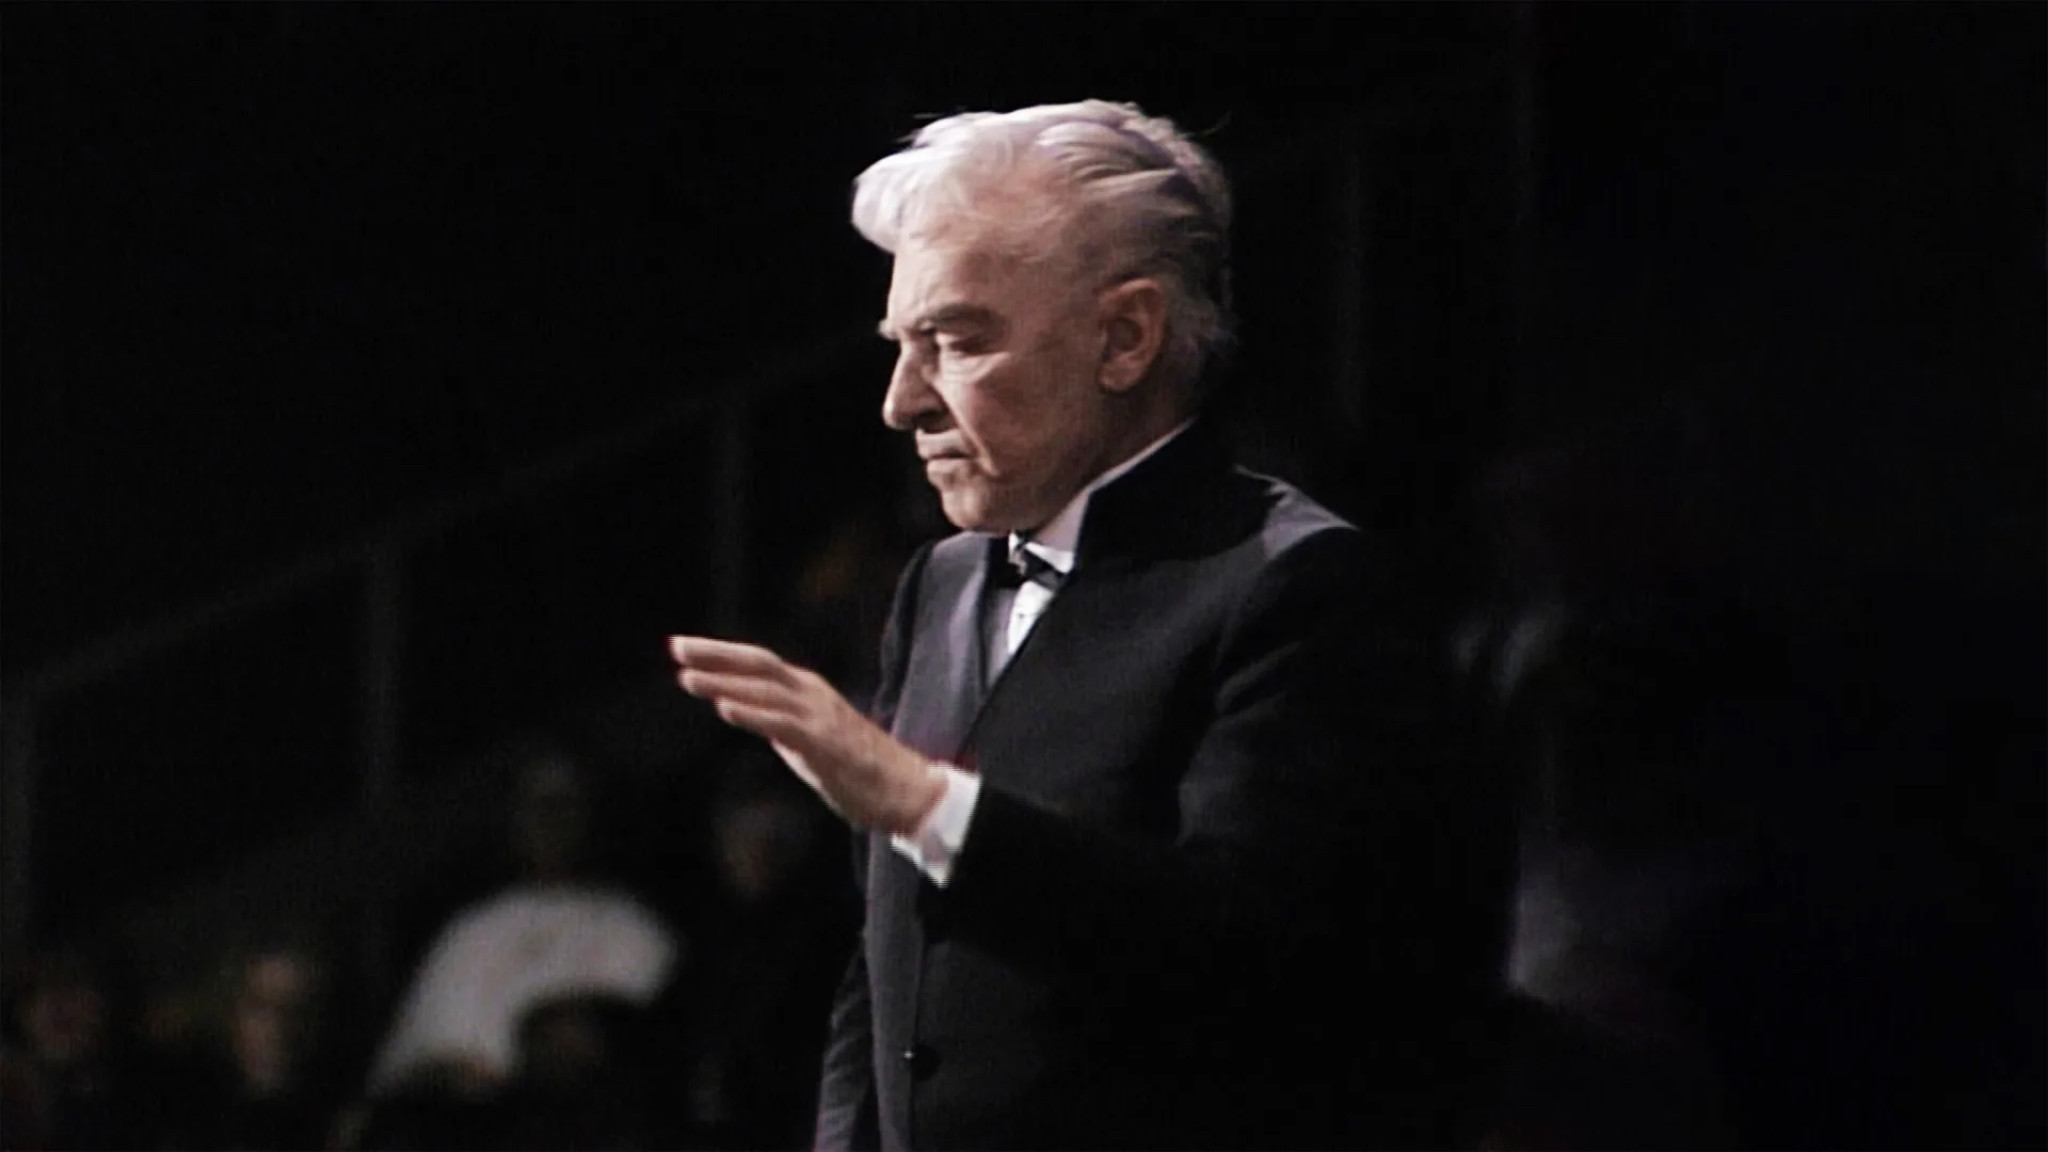 Karajan conducts the New Year's Eve Concert 1983